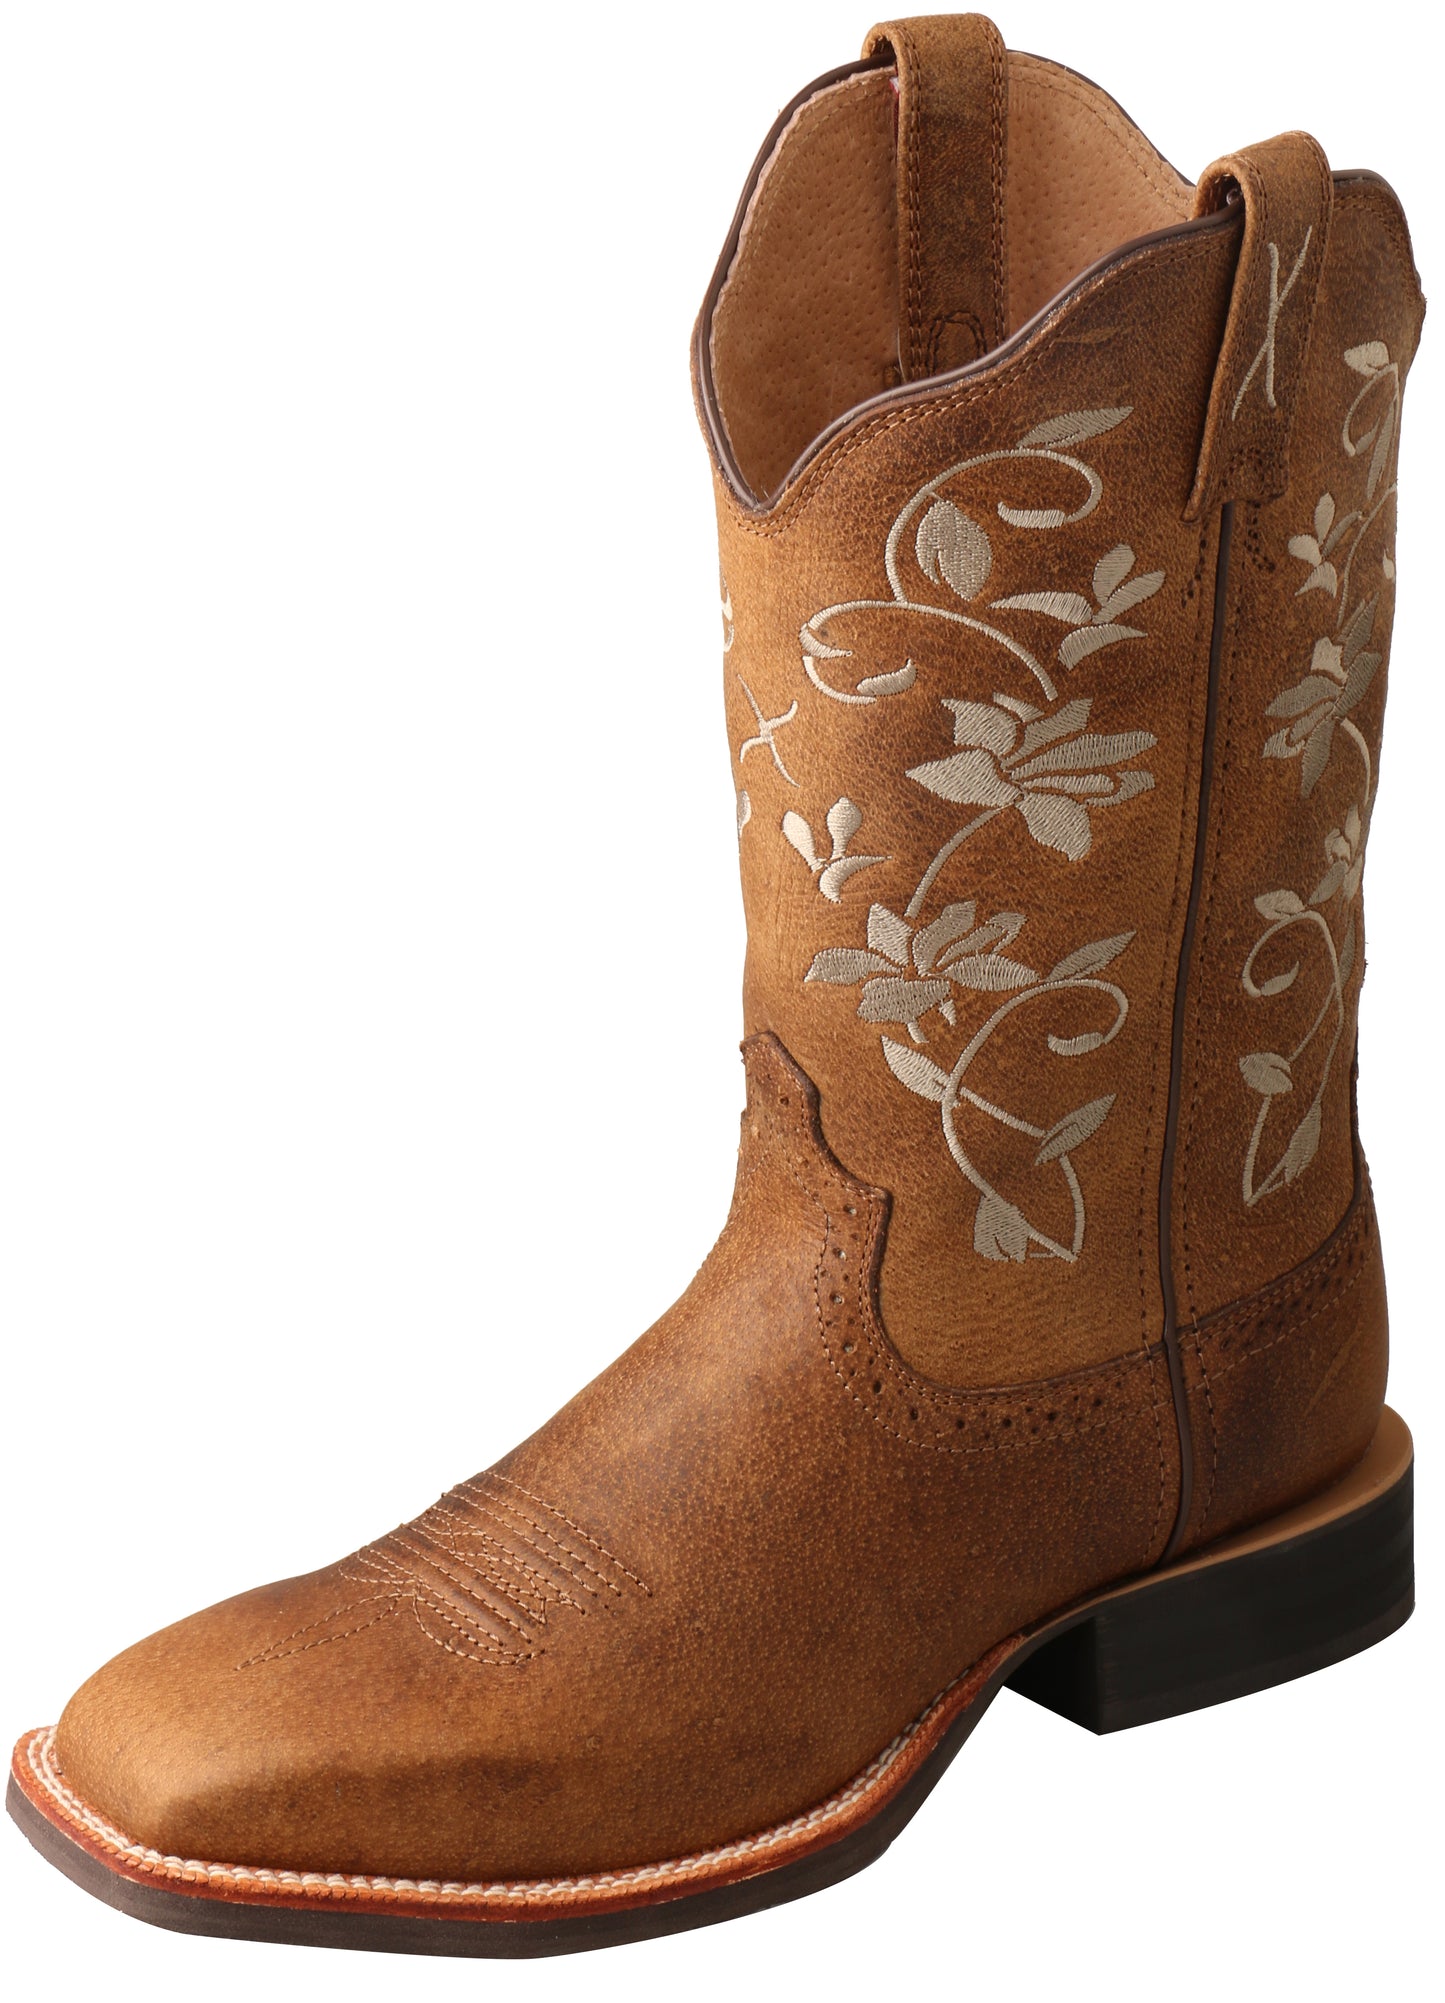 Twisted X Ladies Floral Ruff Stock Boots - Oiled Bomber - TCWRS0005